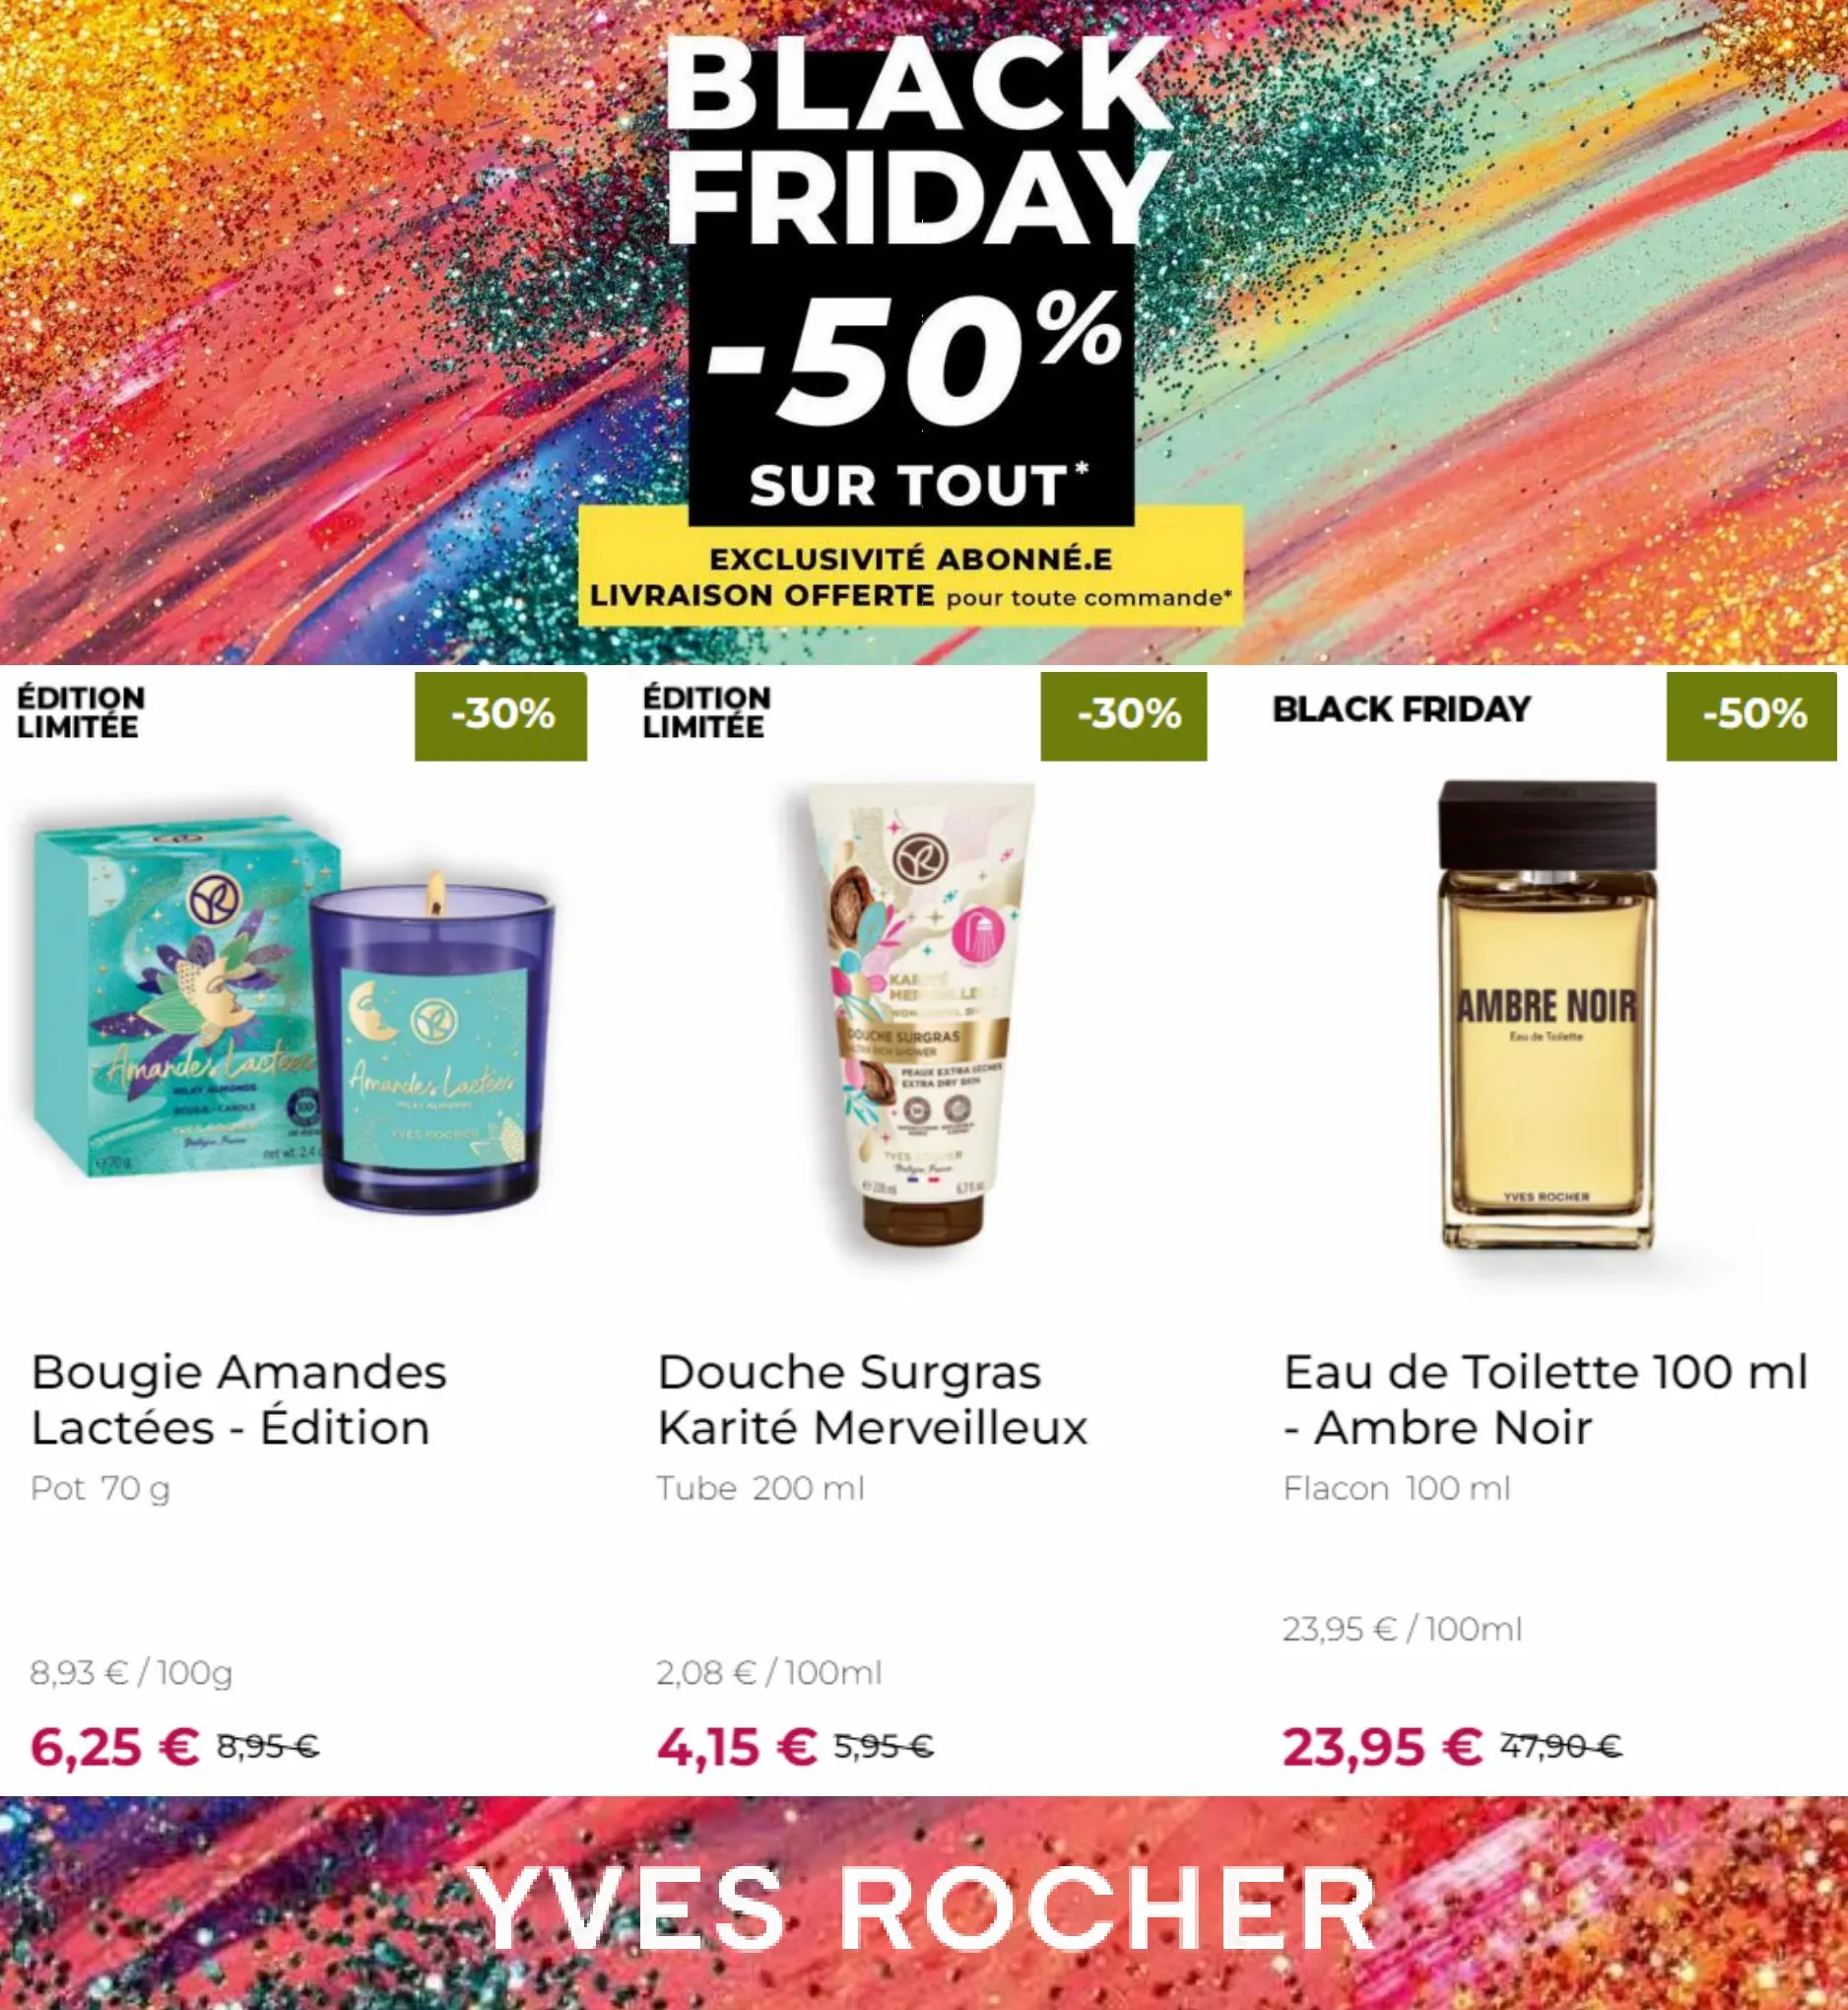 Catalogue Yves Rocher Black Friday, page 00005